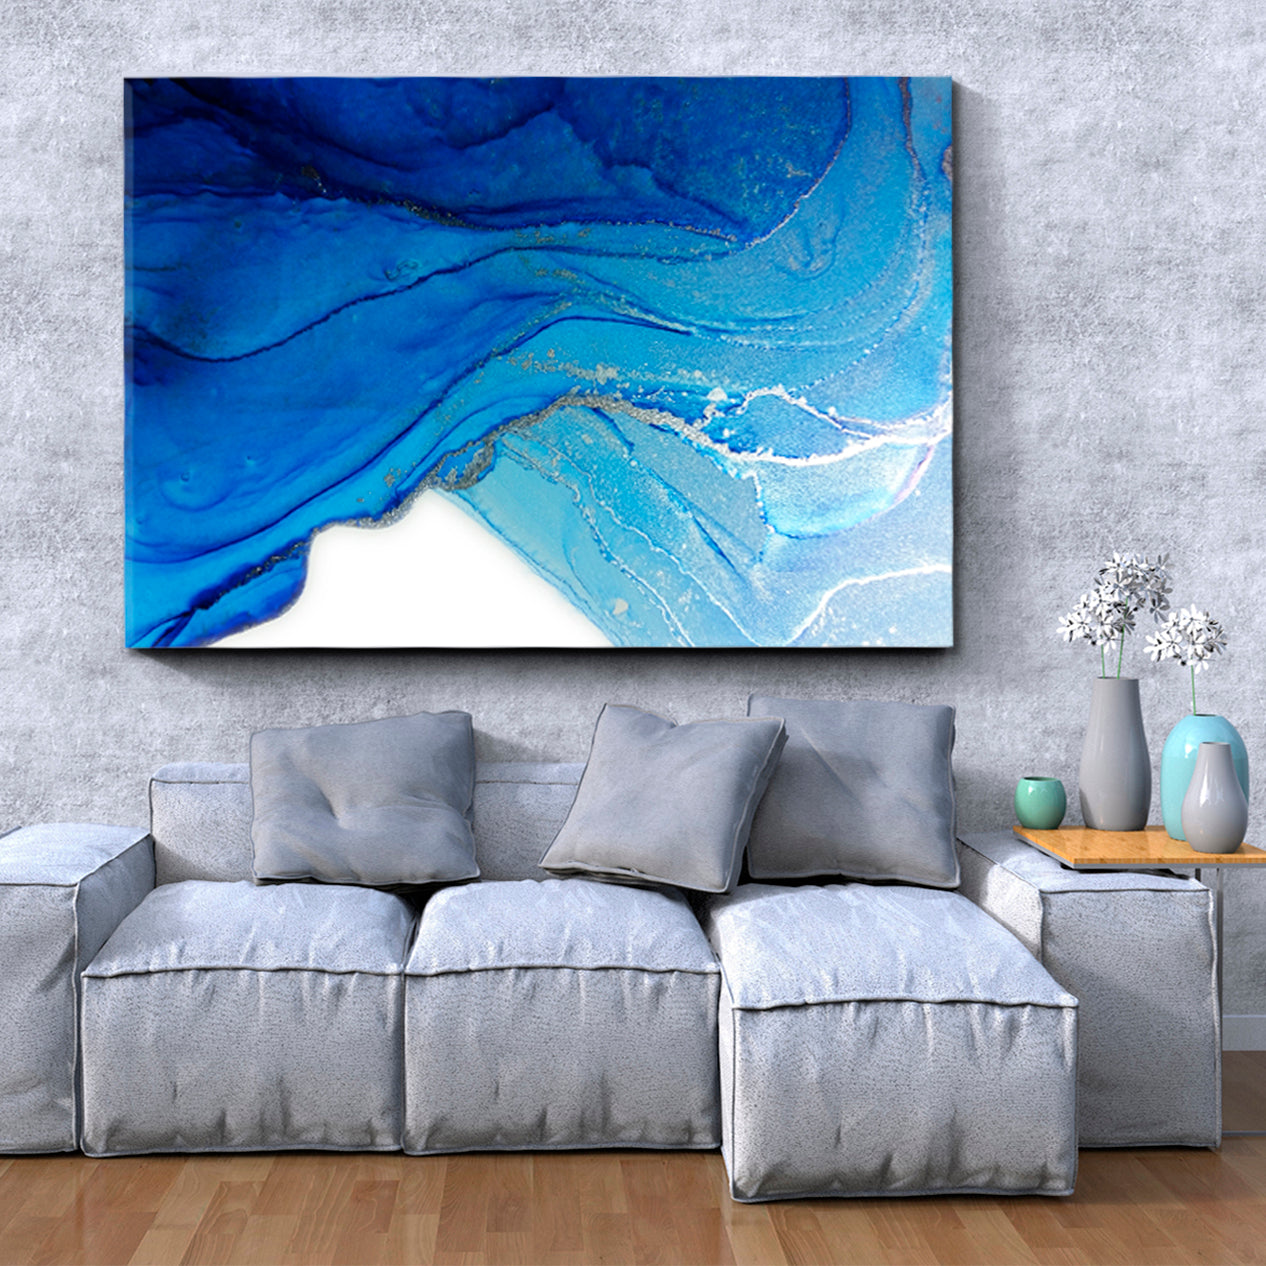 FROST AND WINTER Marble Shades Blue Tornado Abstract Fluid Fluid Art, Oriental Marbling Canvas Print Artesty 1 panel 24" x 16" 